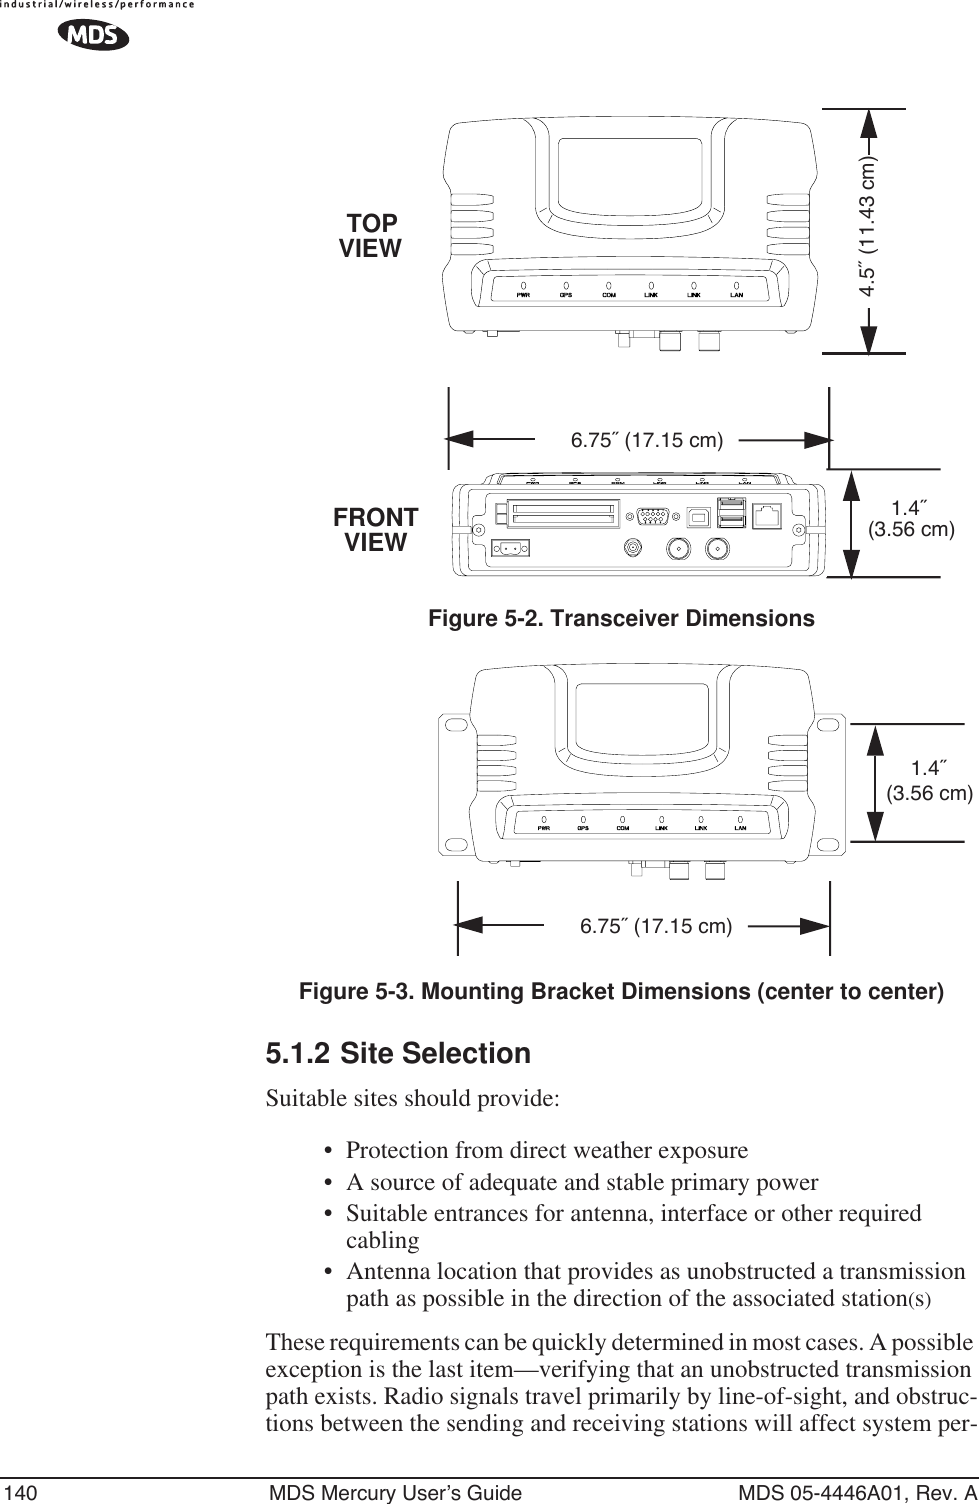 140 MDS Mercury User’s Guide MDS 05-4446A01, Rev. AFigure 5-2. Transceiver DimensionsInvisible place holderInvisible place holderFigure 5-3. Mounting Bracket Dimensions (center to center)5.1.2 Site SelectionSuitable sites should provide:• Protection from direct weather exposure•A source of adequate and stable primary power• Suitable entrances for antenna, interface or other required cabling• Antenna location that provides as unobstructed a transmission path as possible in the direction of the associated station(s)These requirements can be quickly determined in most cases. A possible exception is the last item—verifying that an unobstructed transmission path exists. Radio signals travel primarily by line-of-sight, and obstruc-tions between the sending and receiving stations will affect system per-1.4˝ 6.75˝ (17.15 cm)4.5˝ (11.43 cm)TOPFRONT (3.56 cm)VIEWVIEW6.75˝ (17.15 cm)1.4˝ (3.56 cm)